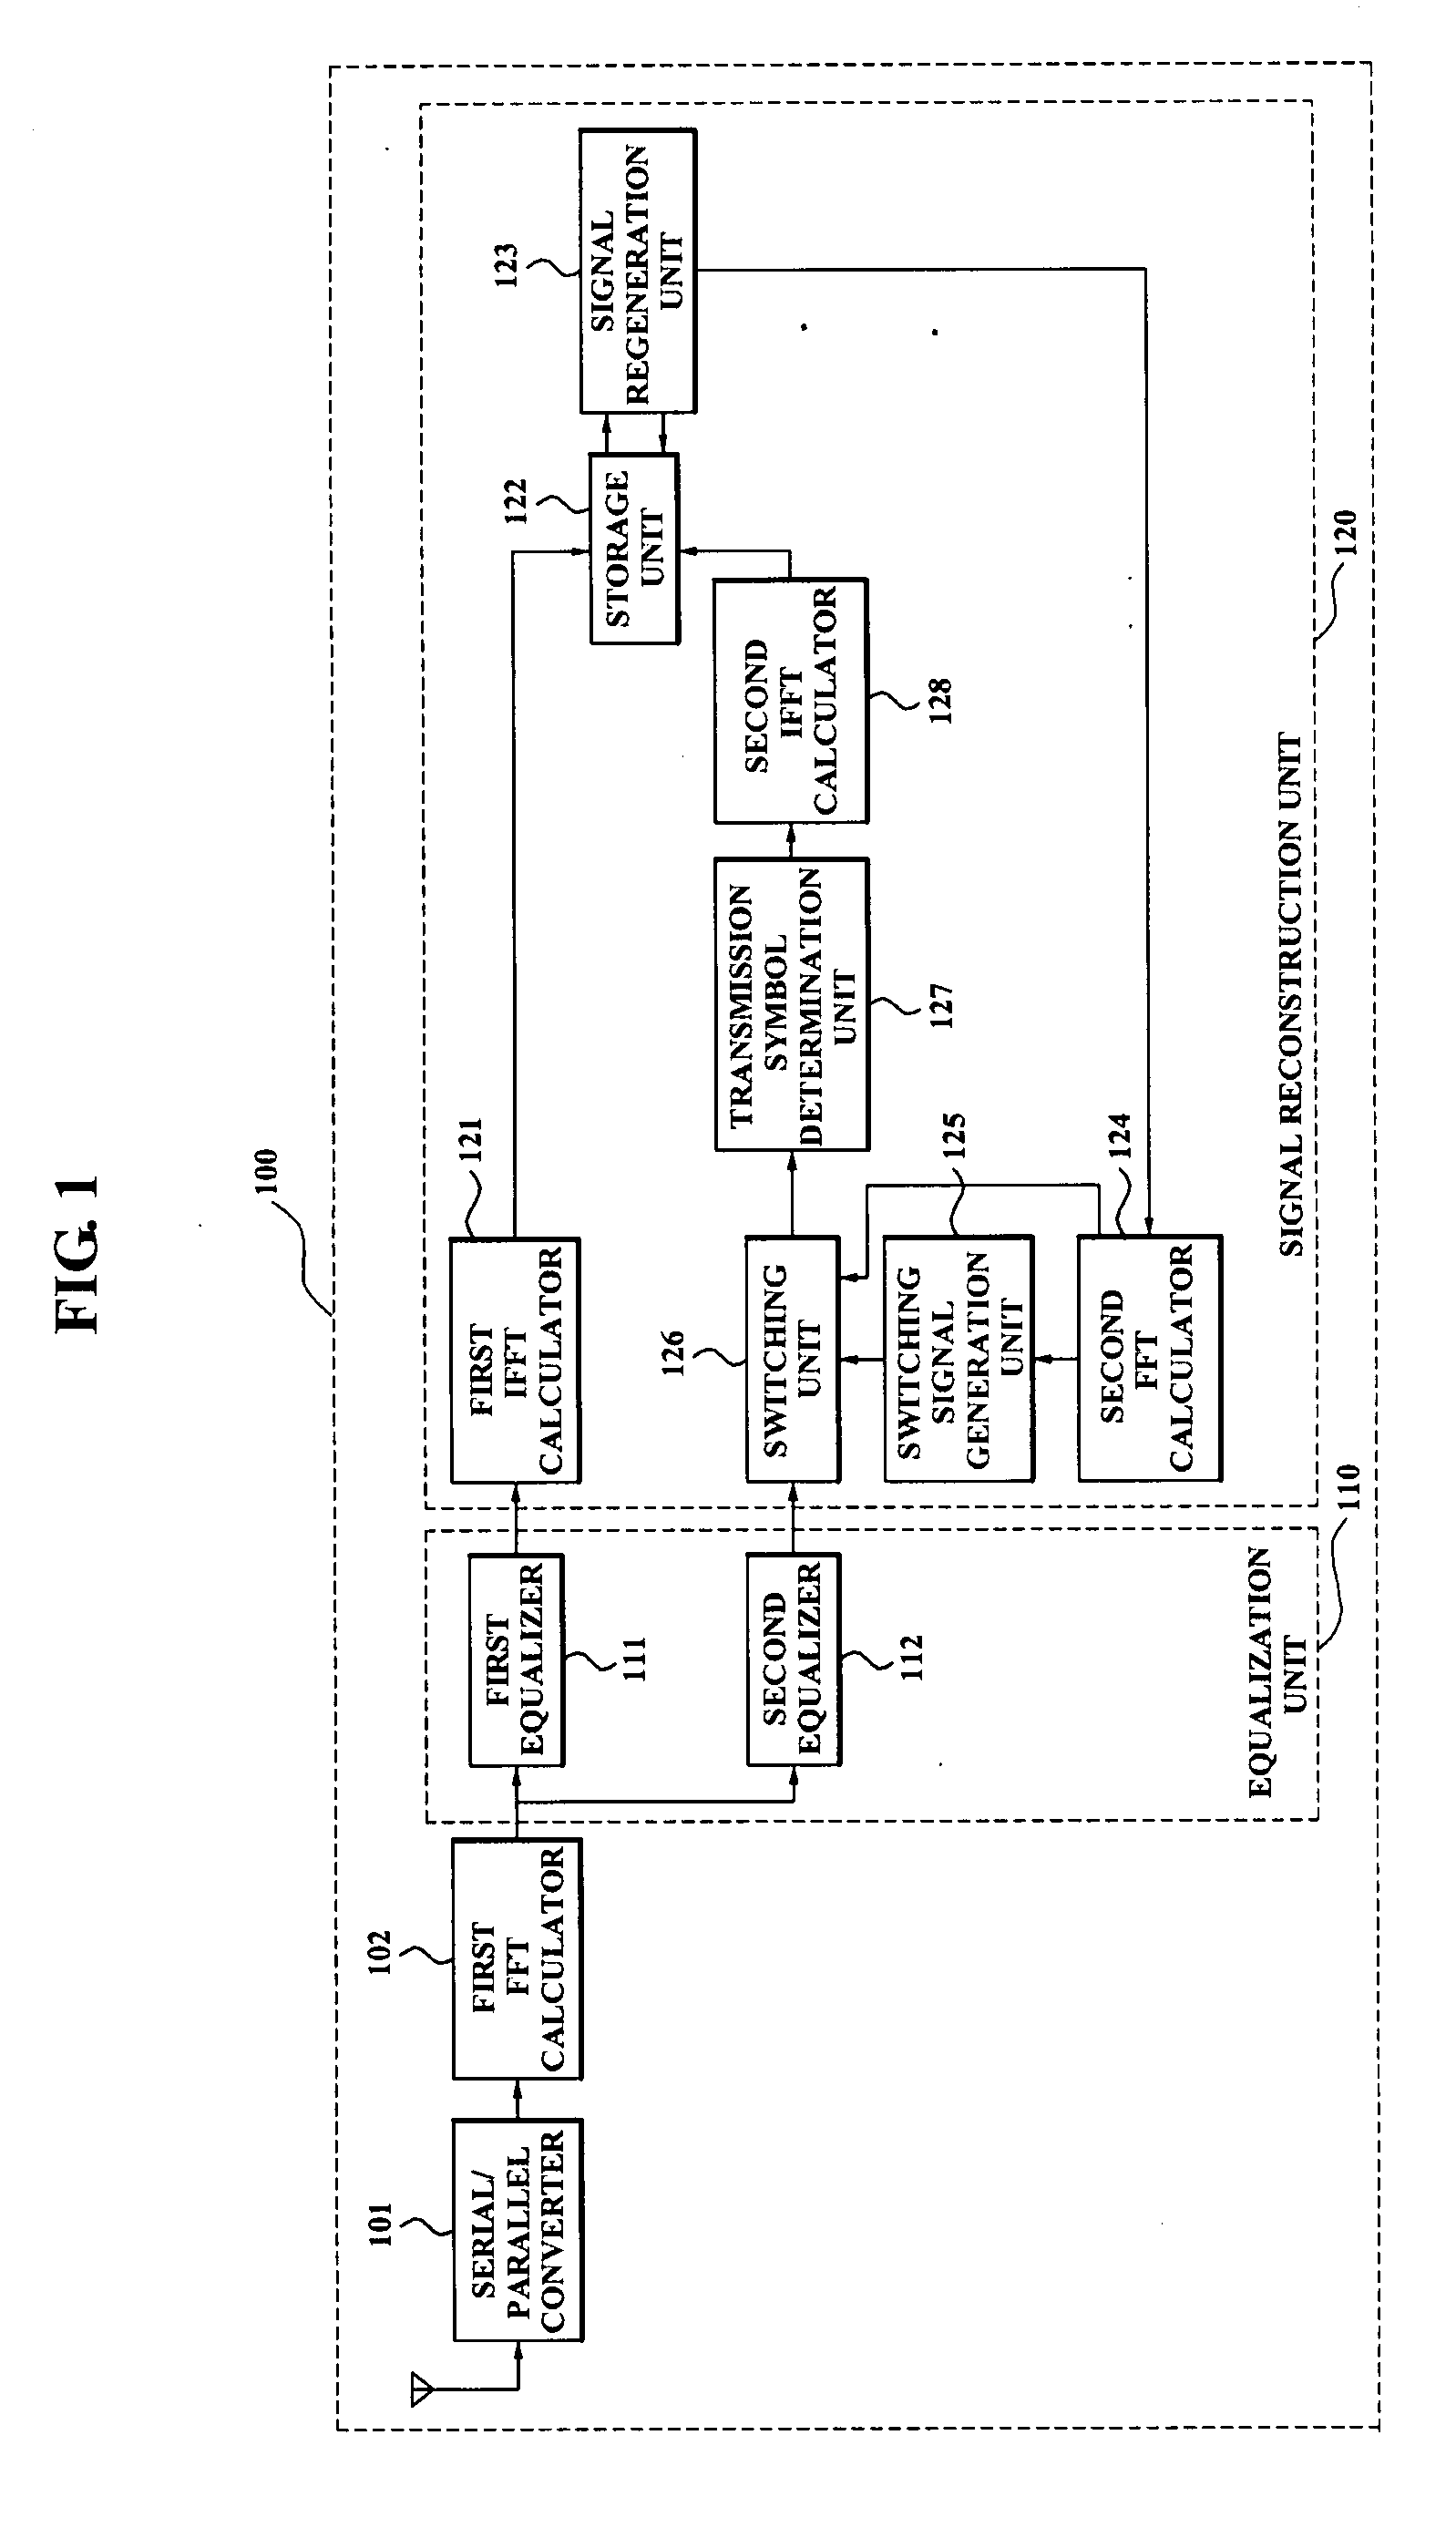 Apparatus for equalizing clipping noise signals of receiver systems and method thereof